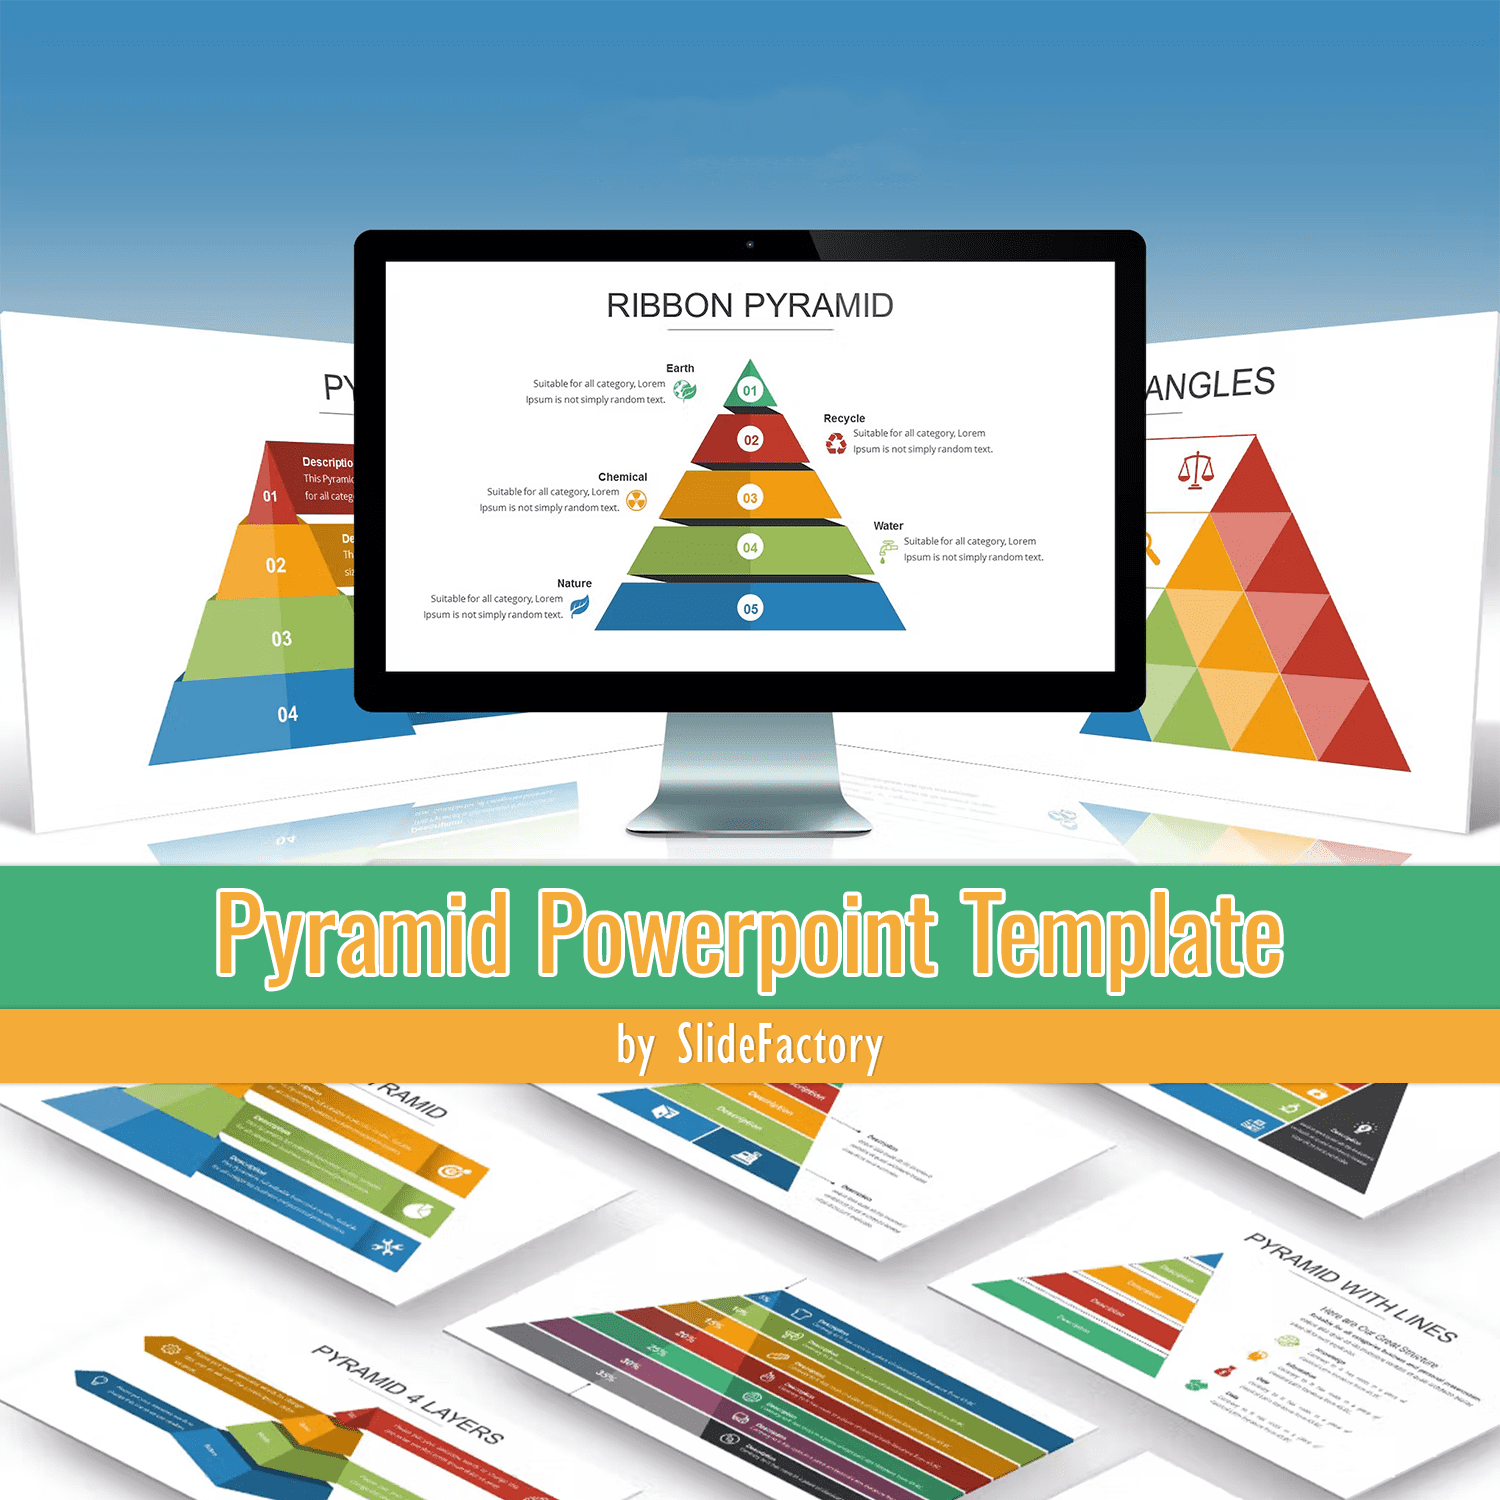 Pyramid Powerpoint Template.